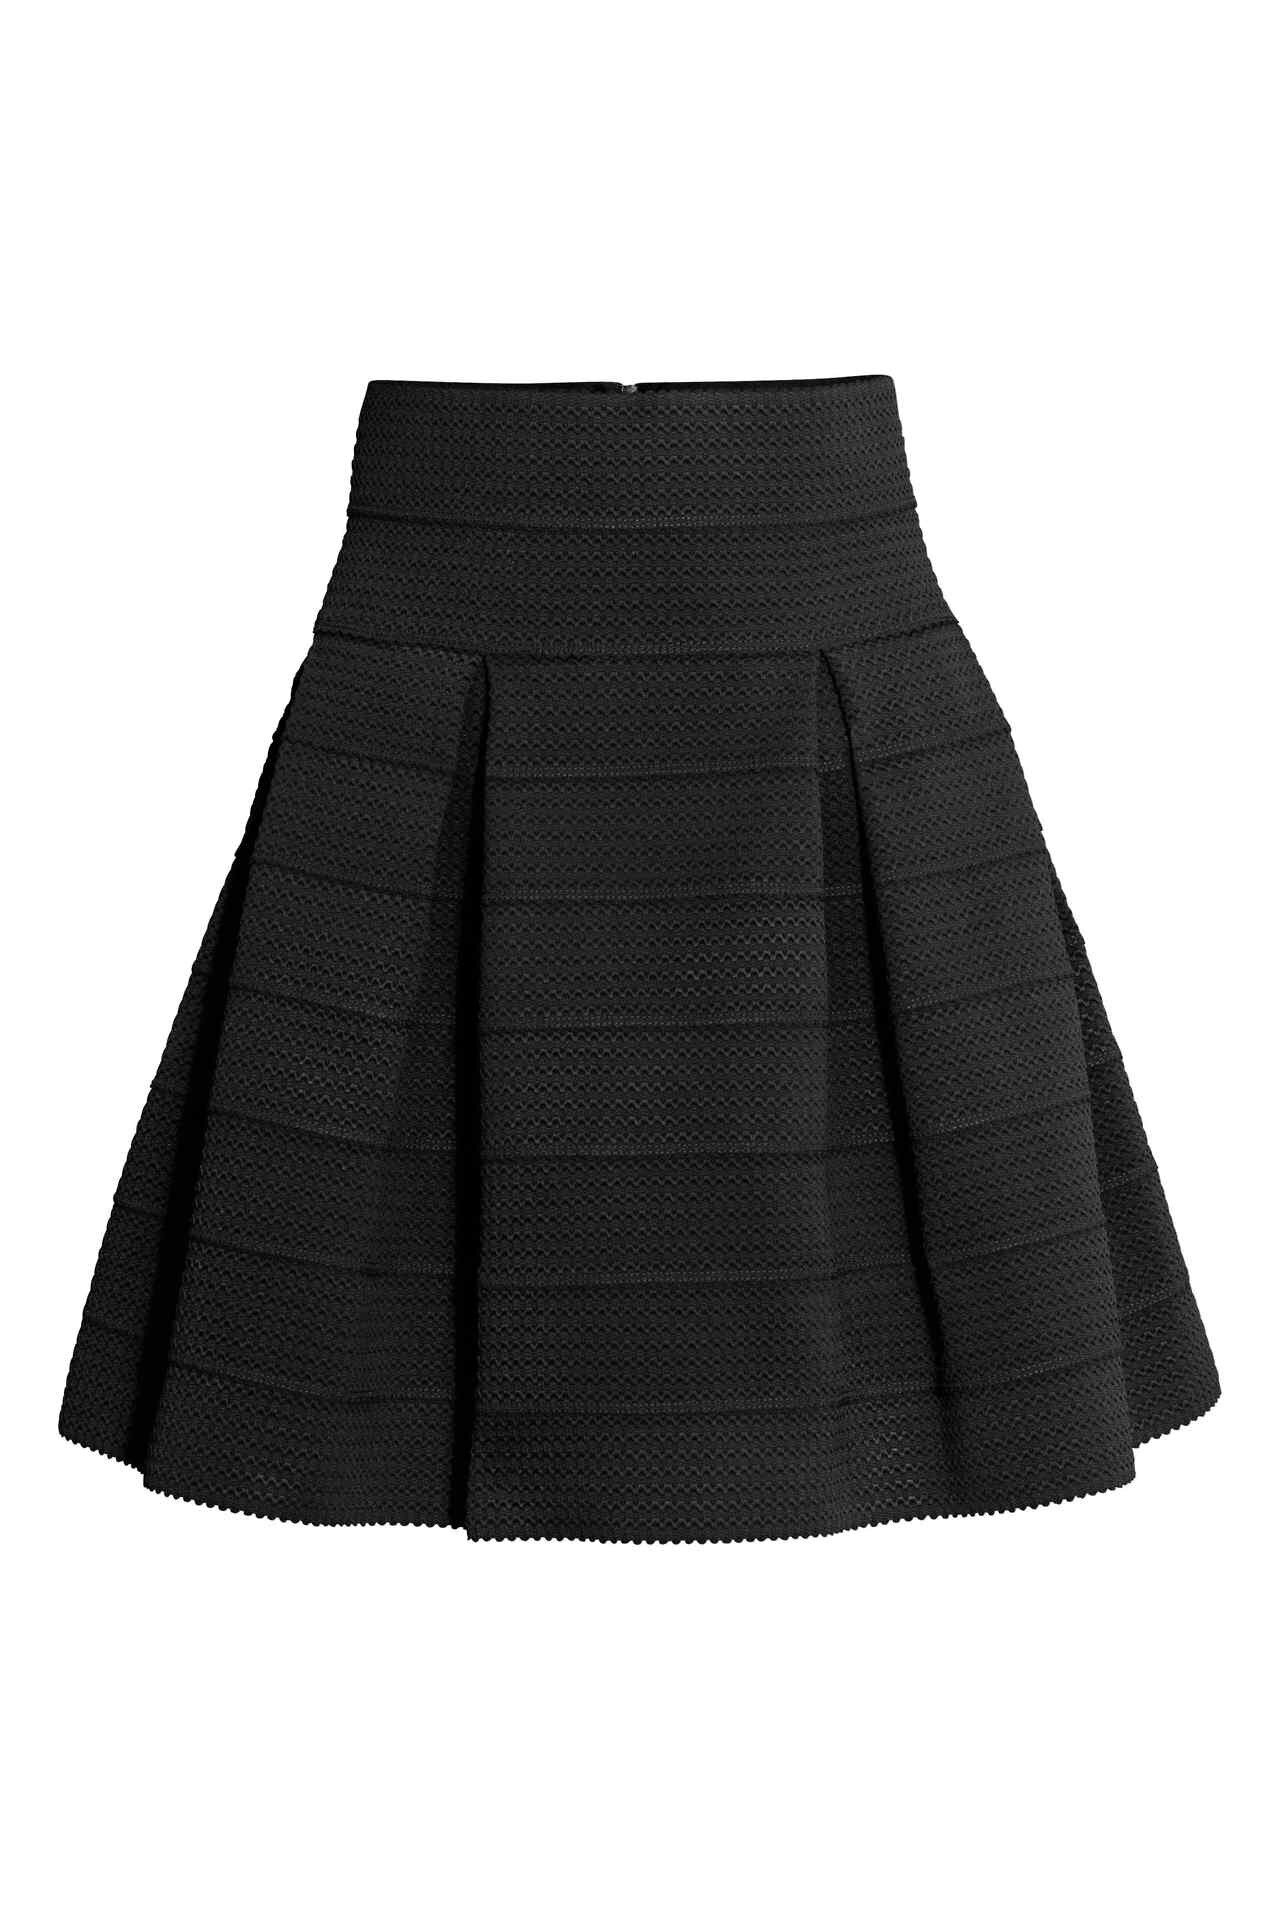 H&M Textured A-Line Skirt in Black — UFO No More